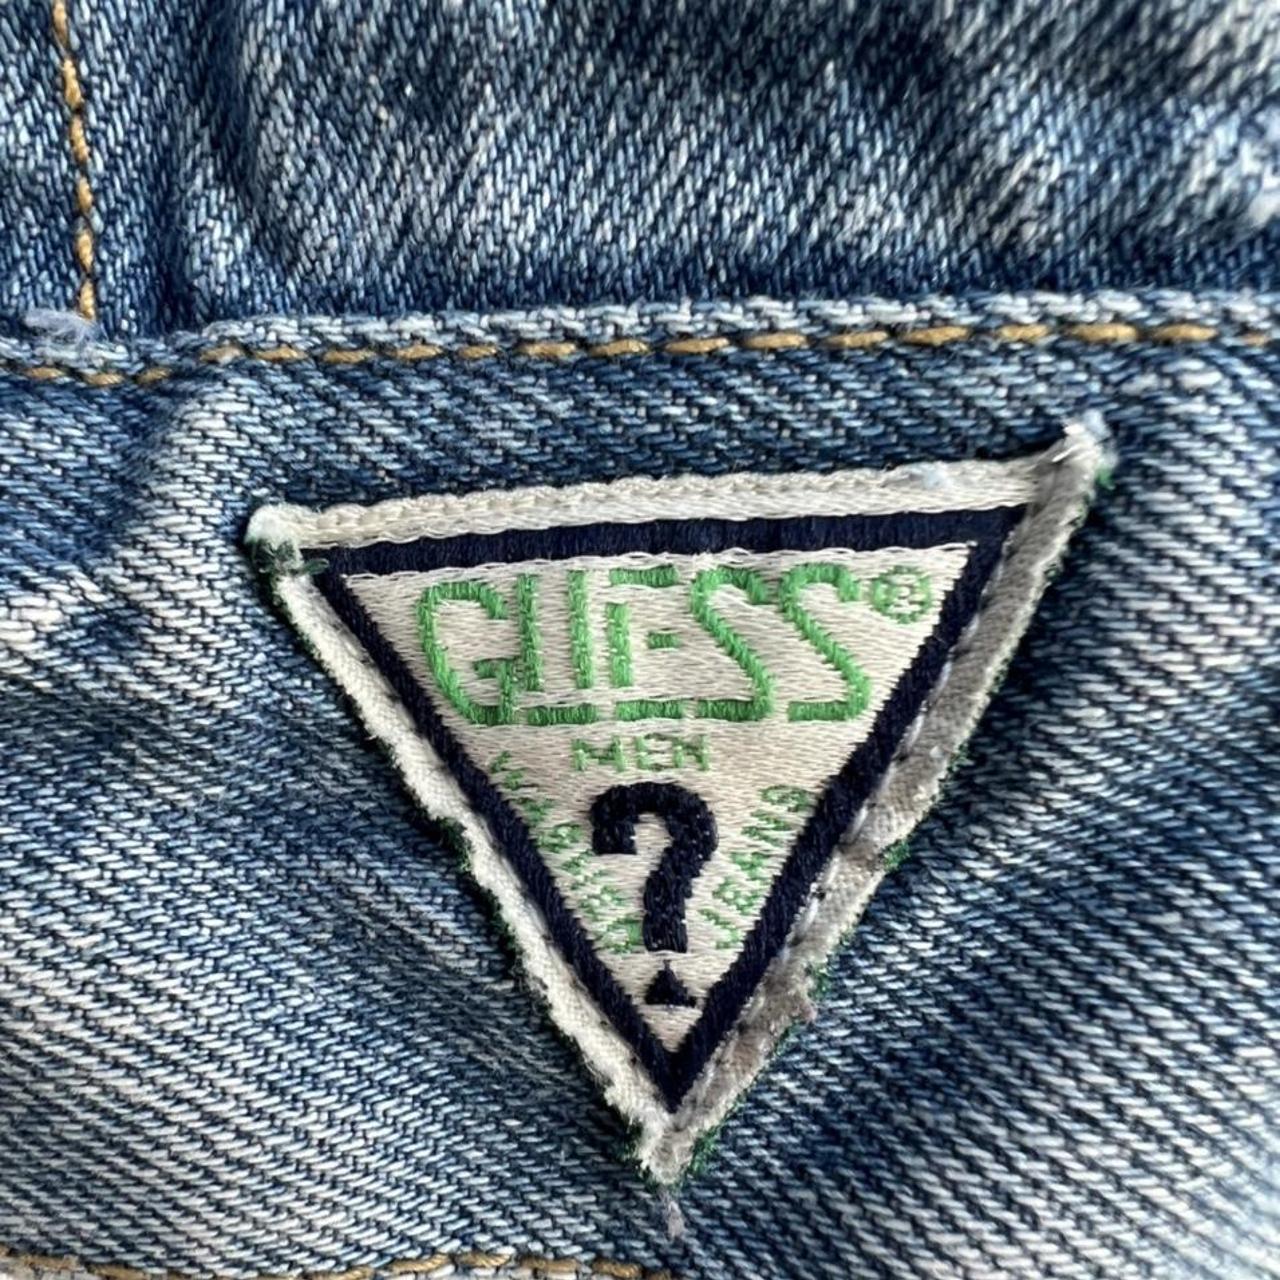 Vintage Guess by Georges Marciano Denim Jacket 